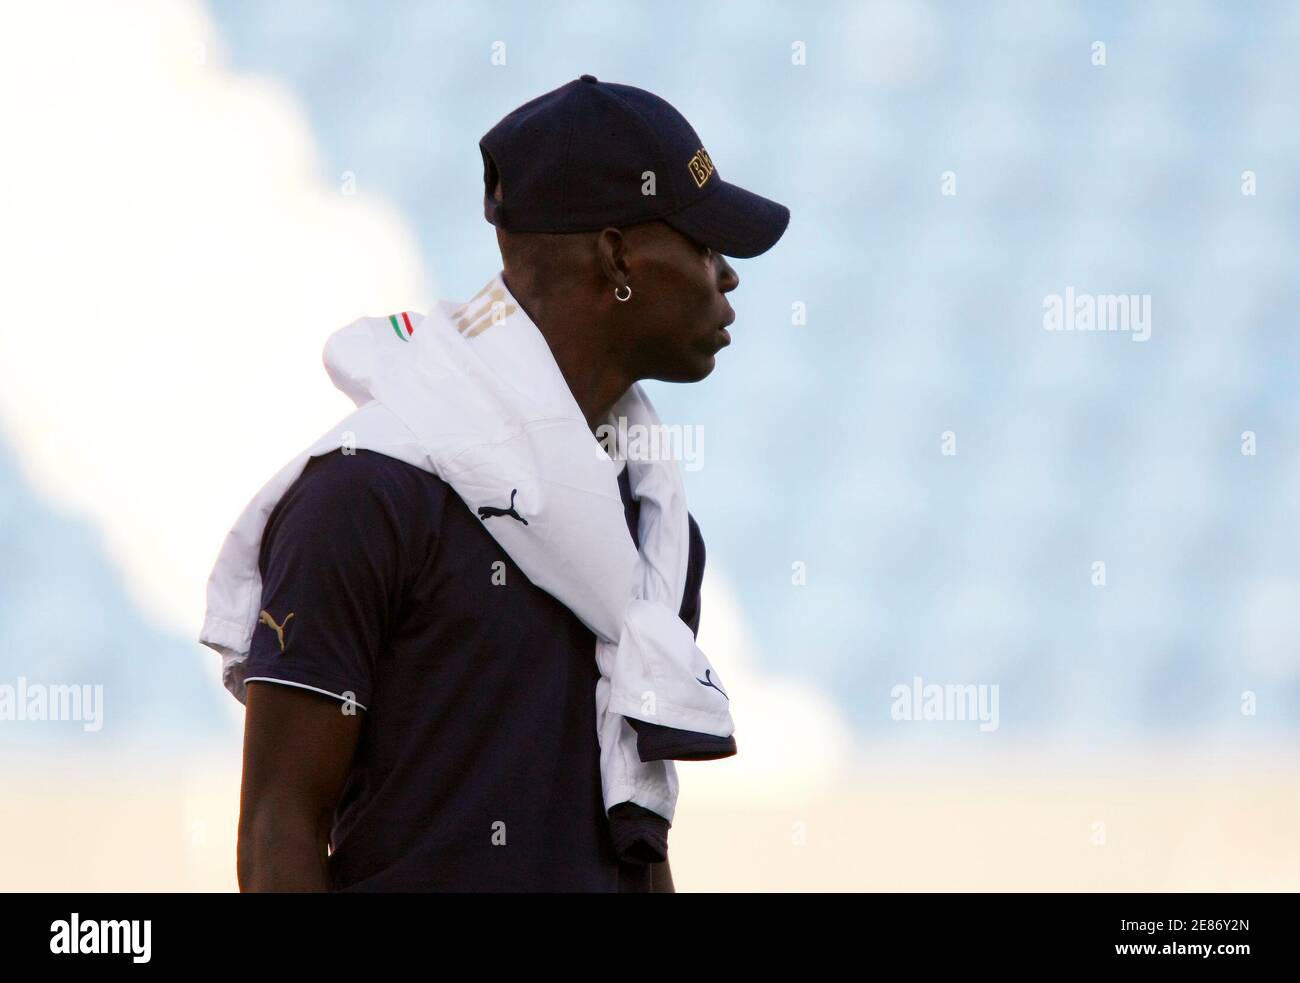 Italy's Mario Balotelli stands on the pitch before their European U21  Championship soccer match against Belarus at Olympia stadium in Helsingborg  June 23, 2009. Balotelli will not play due to a red